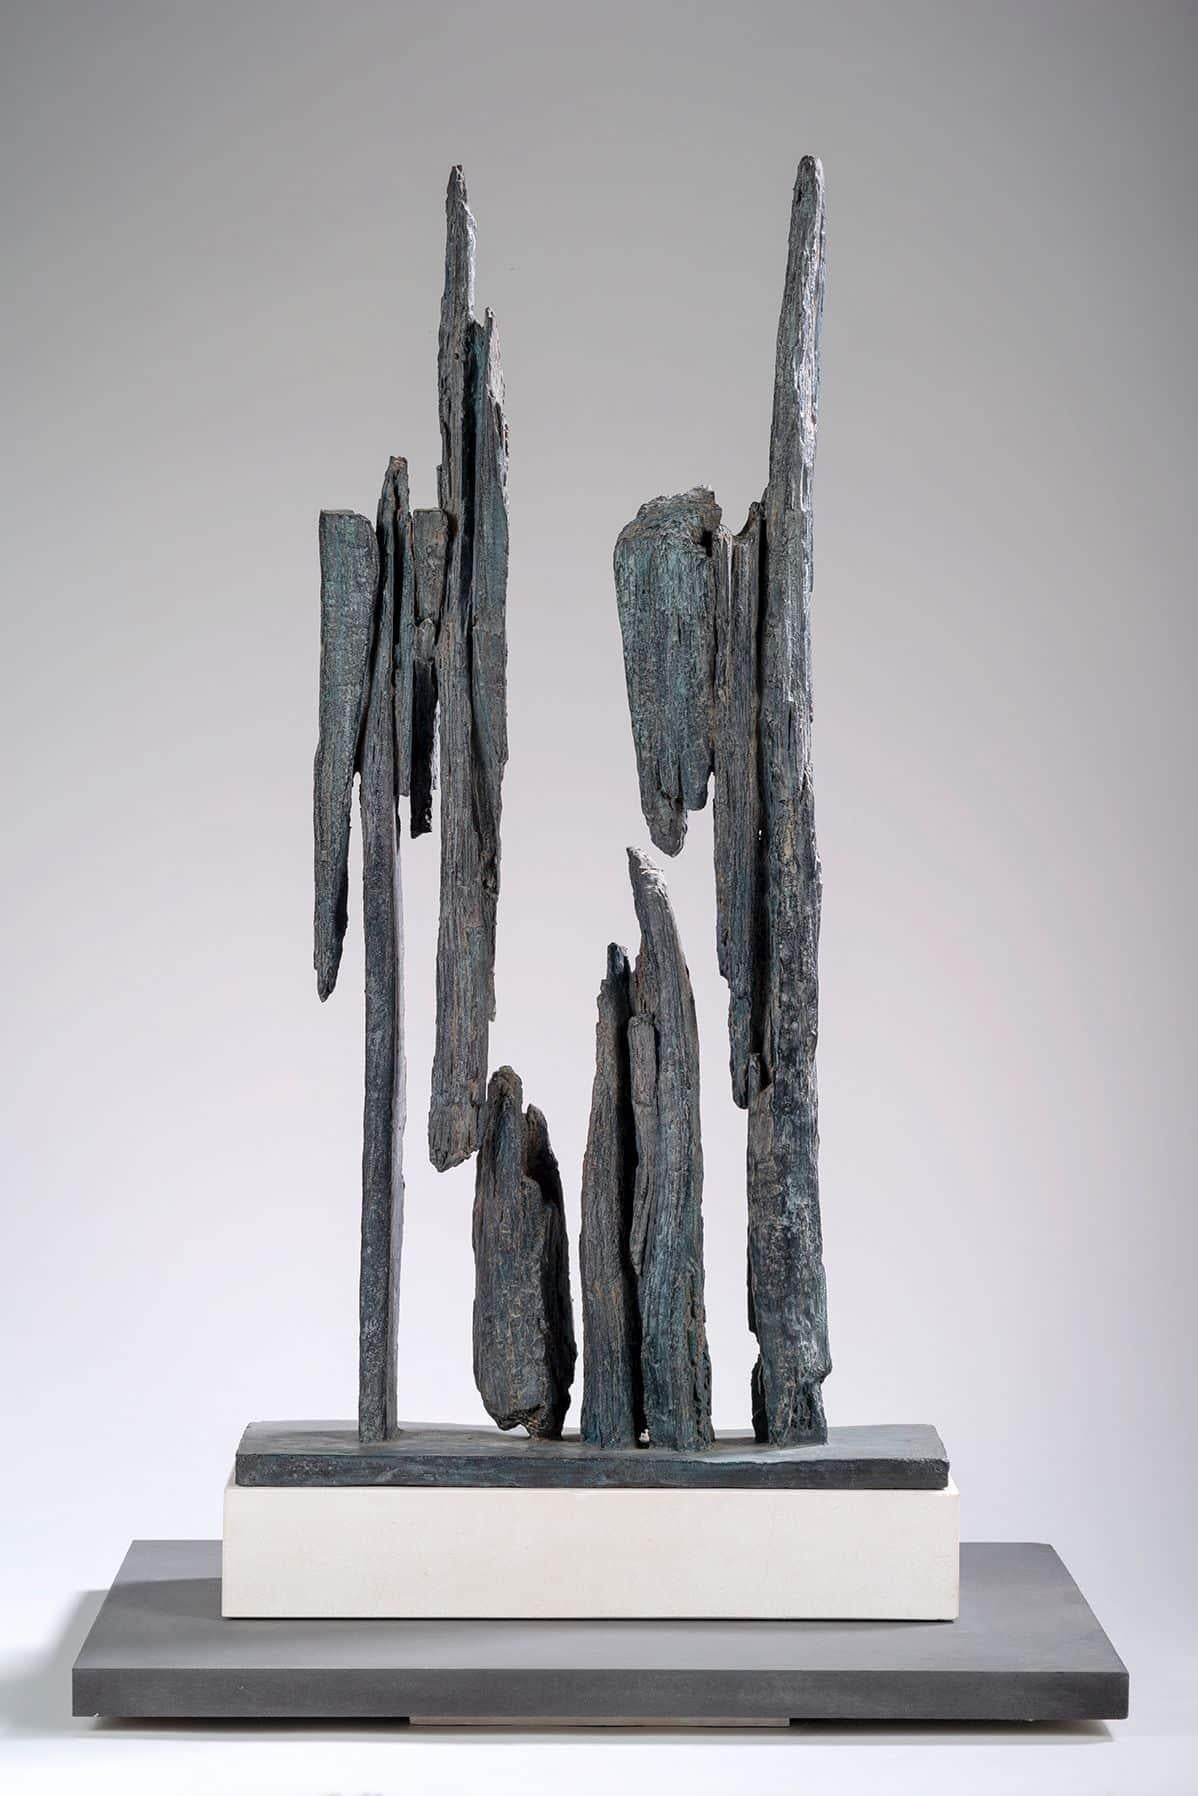 Fragment n°2 is a bronze sculpture by contemporary artist Martine Demal, dimensions including patinated brass base are 60 × 30 × 10.5 cm (23.6 × 11.8 × 4.1 in). 
The sculpture is signed and numbered, it is part of a limited edition of 8 editions + 4